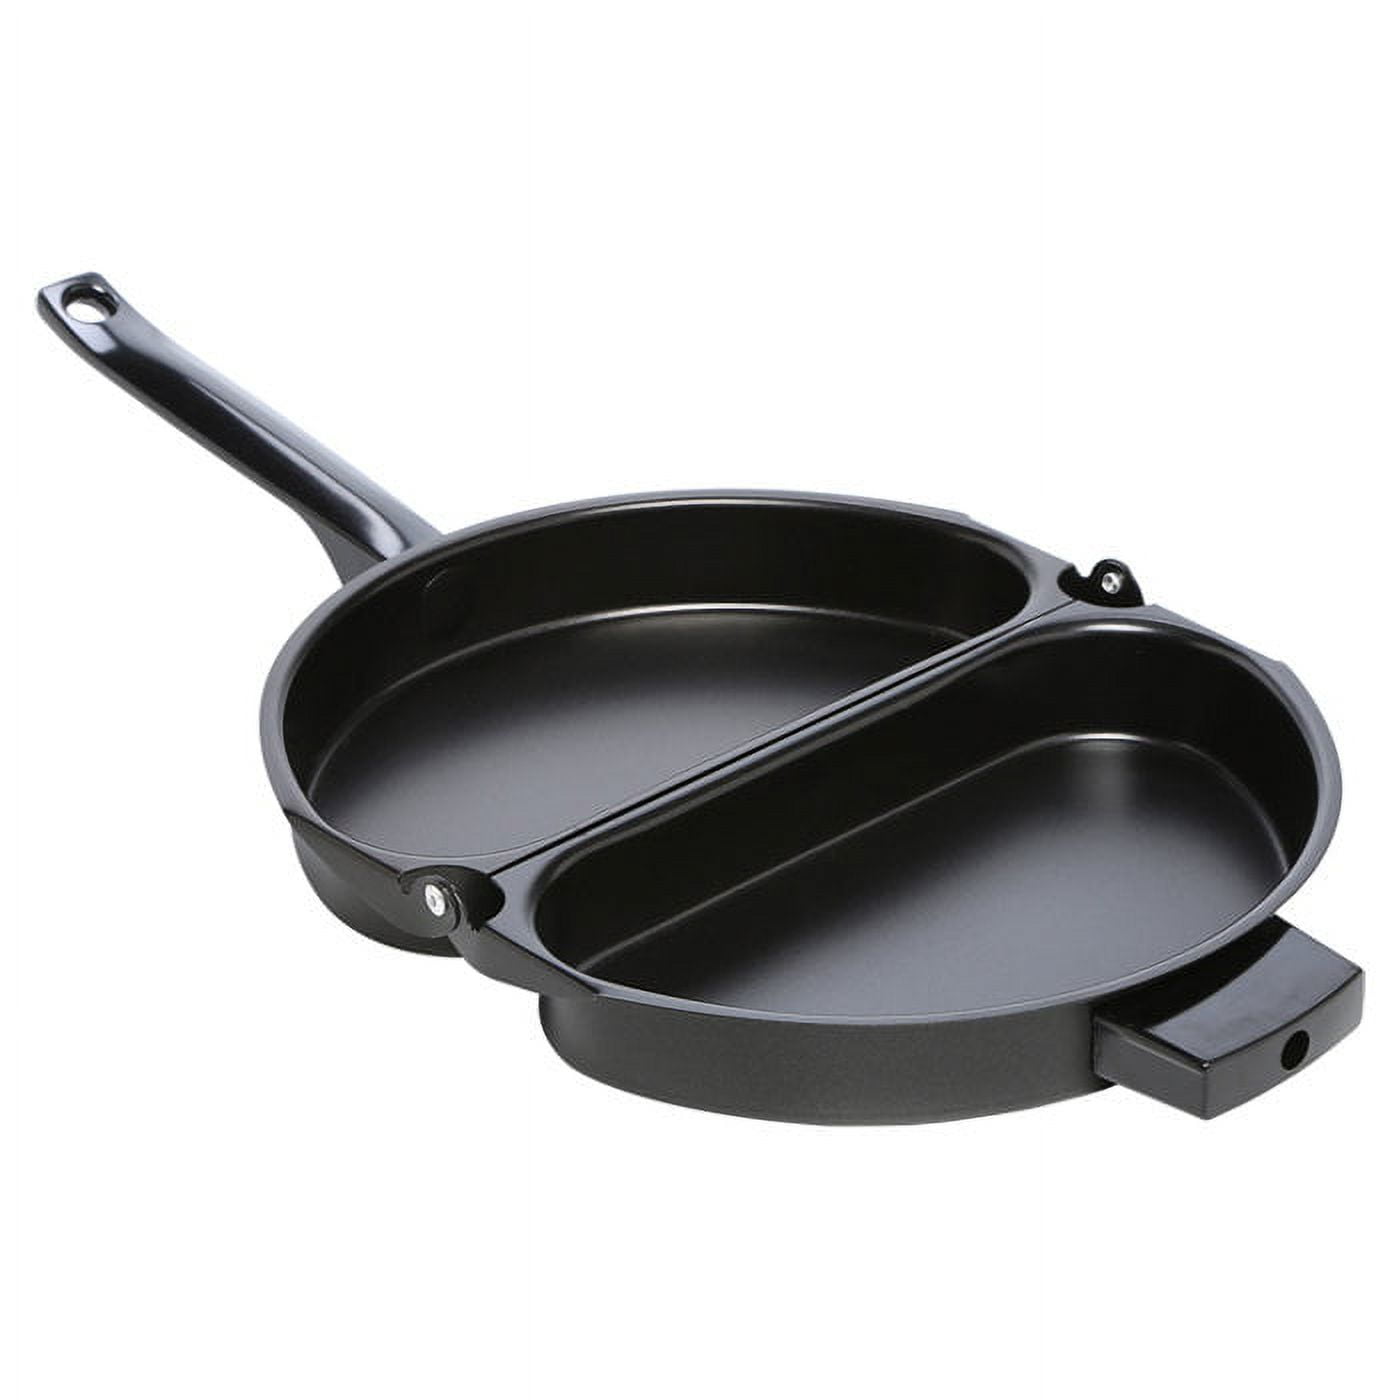 T-fal A857S3 Specialty Nonstick Omelette Pan 8-Inch 9.5-Inch and